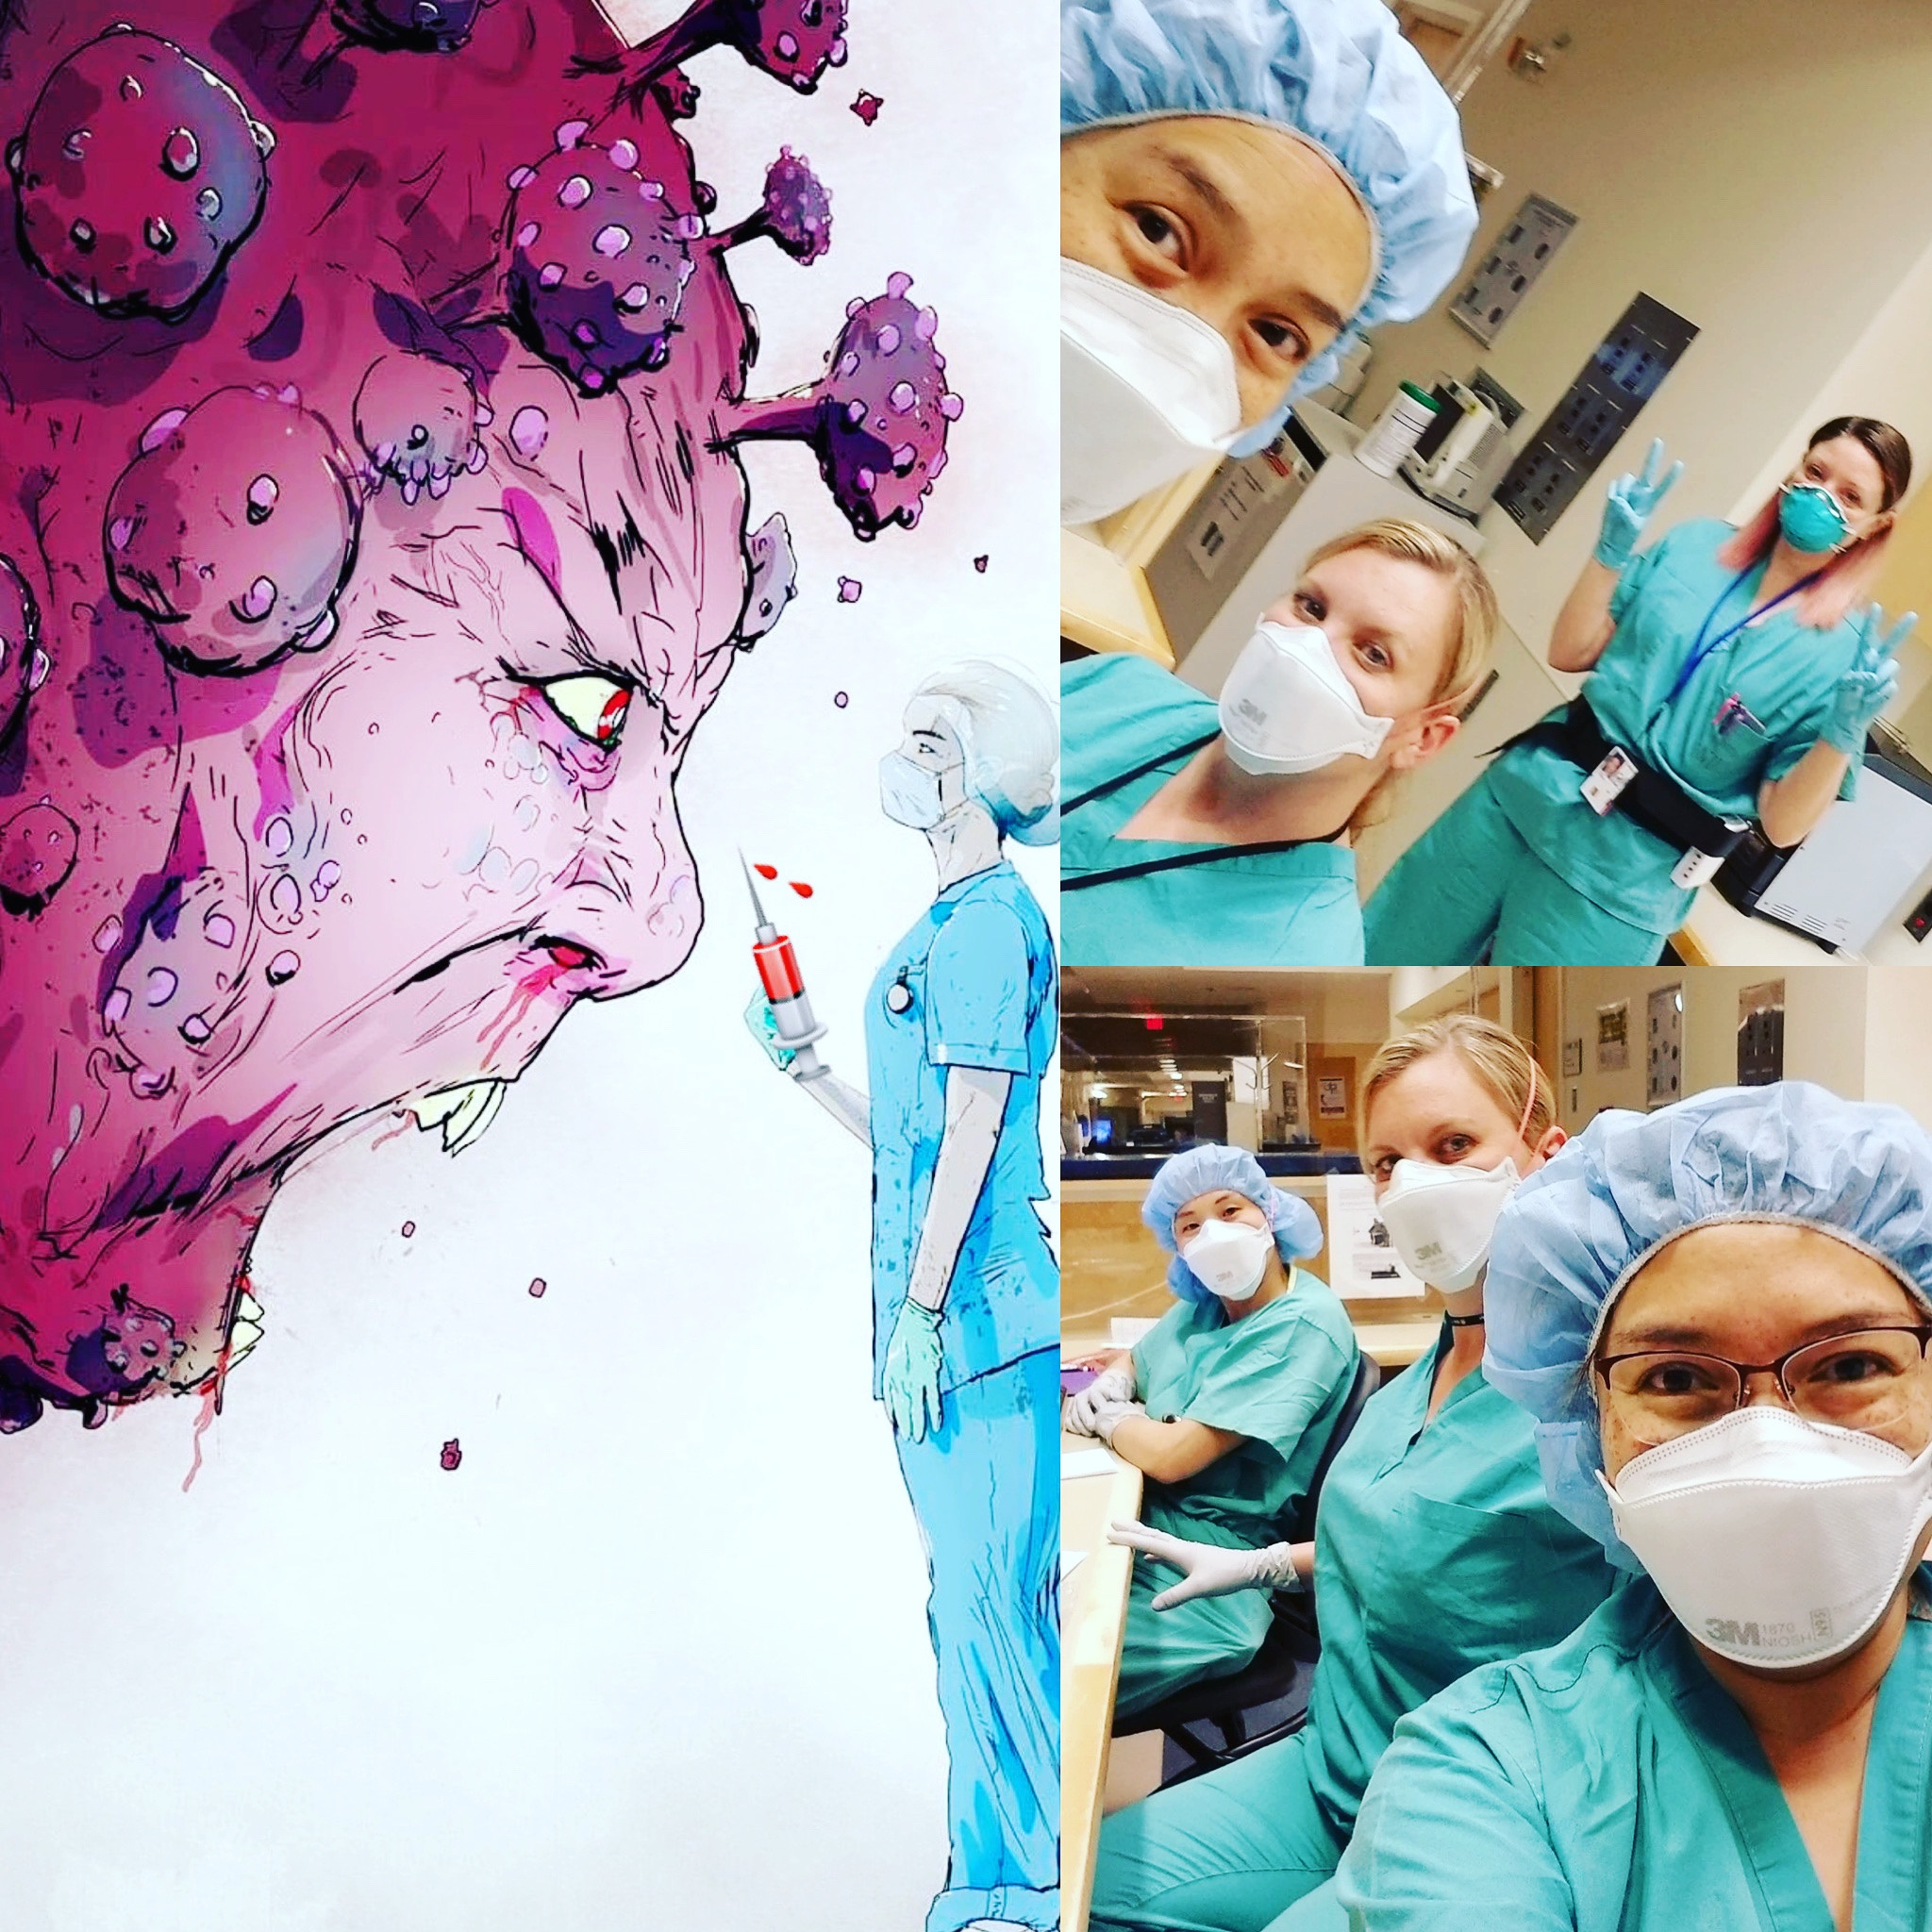 This collage is composed of a cartoon on the left of a personified COVID Virus screaming at a person in scrubs holding a syringe. The right two panels are nurses in scrubs and masks in the clinical center.